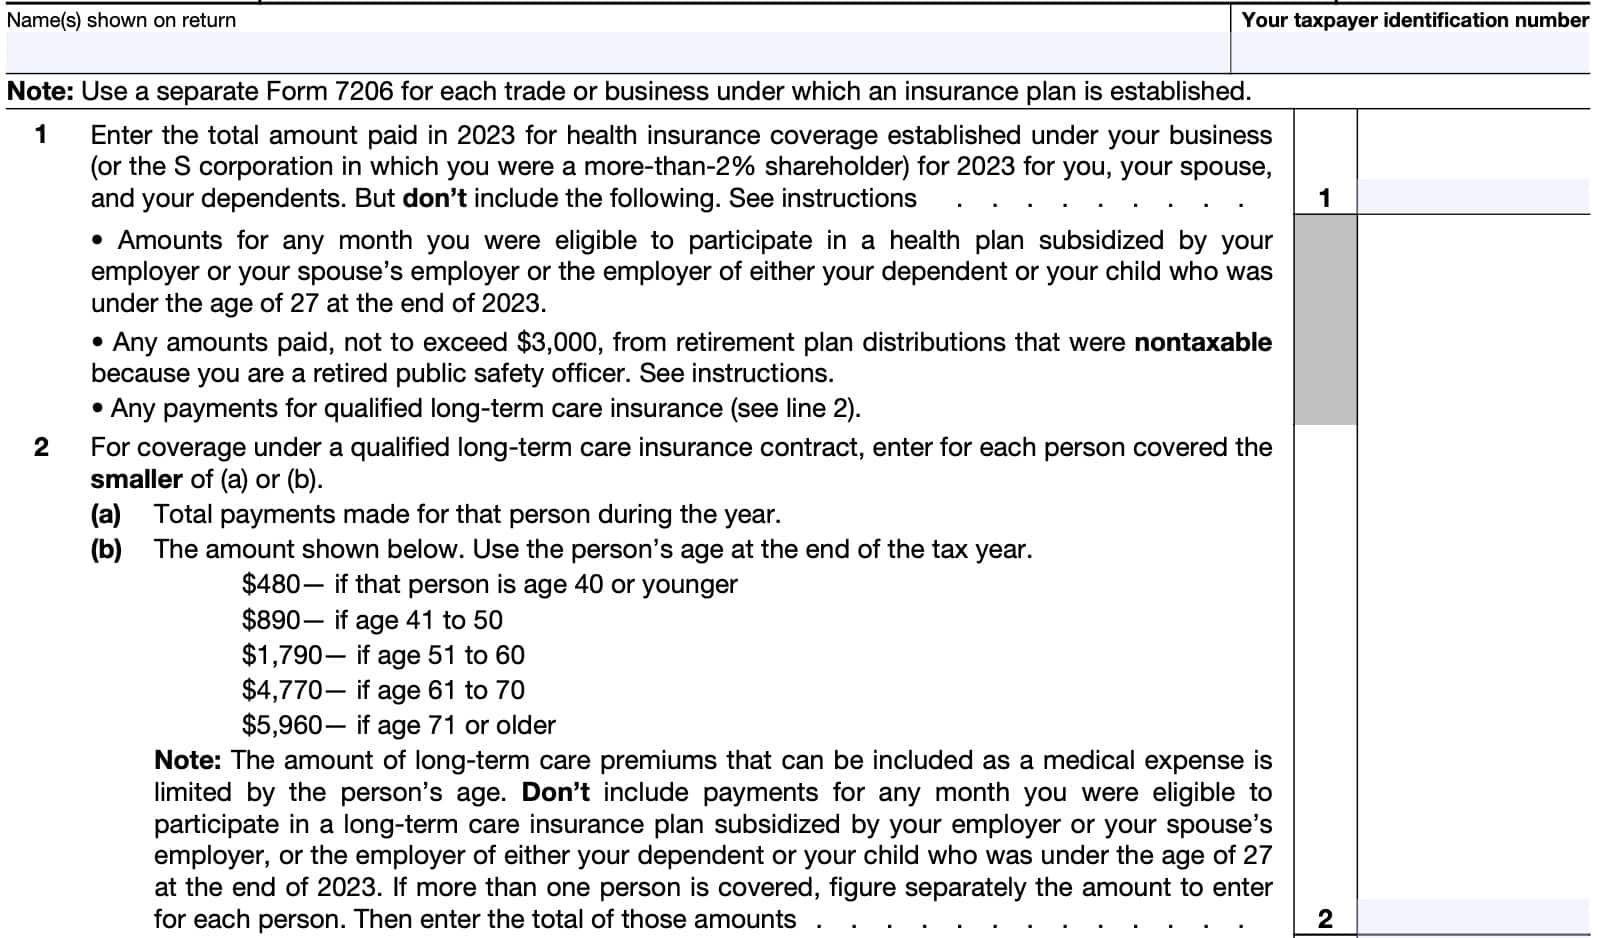 irs form 7206, line 1 and line 2